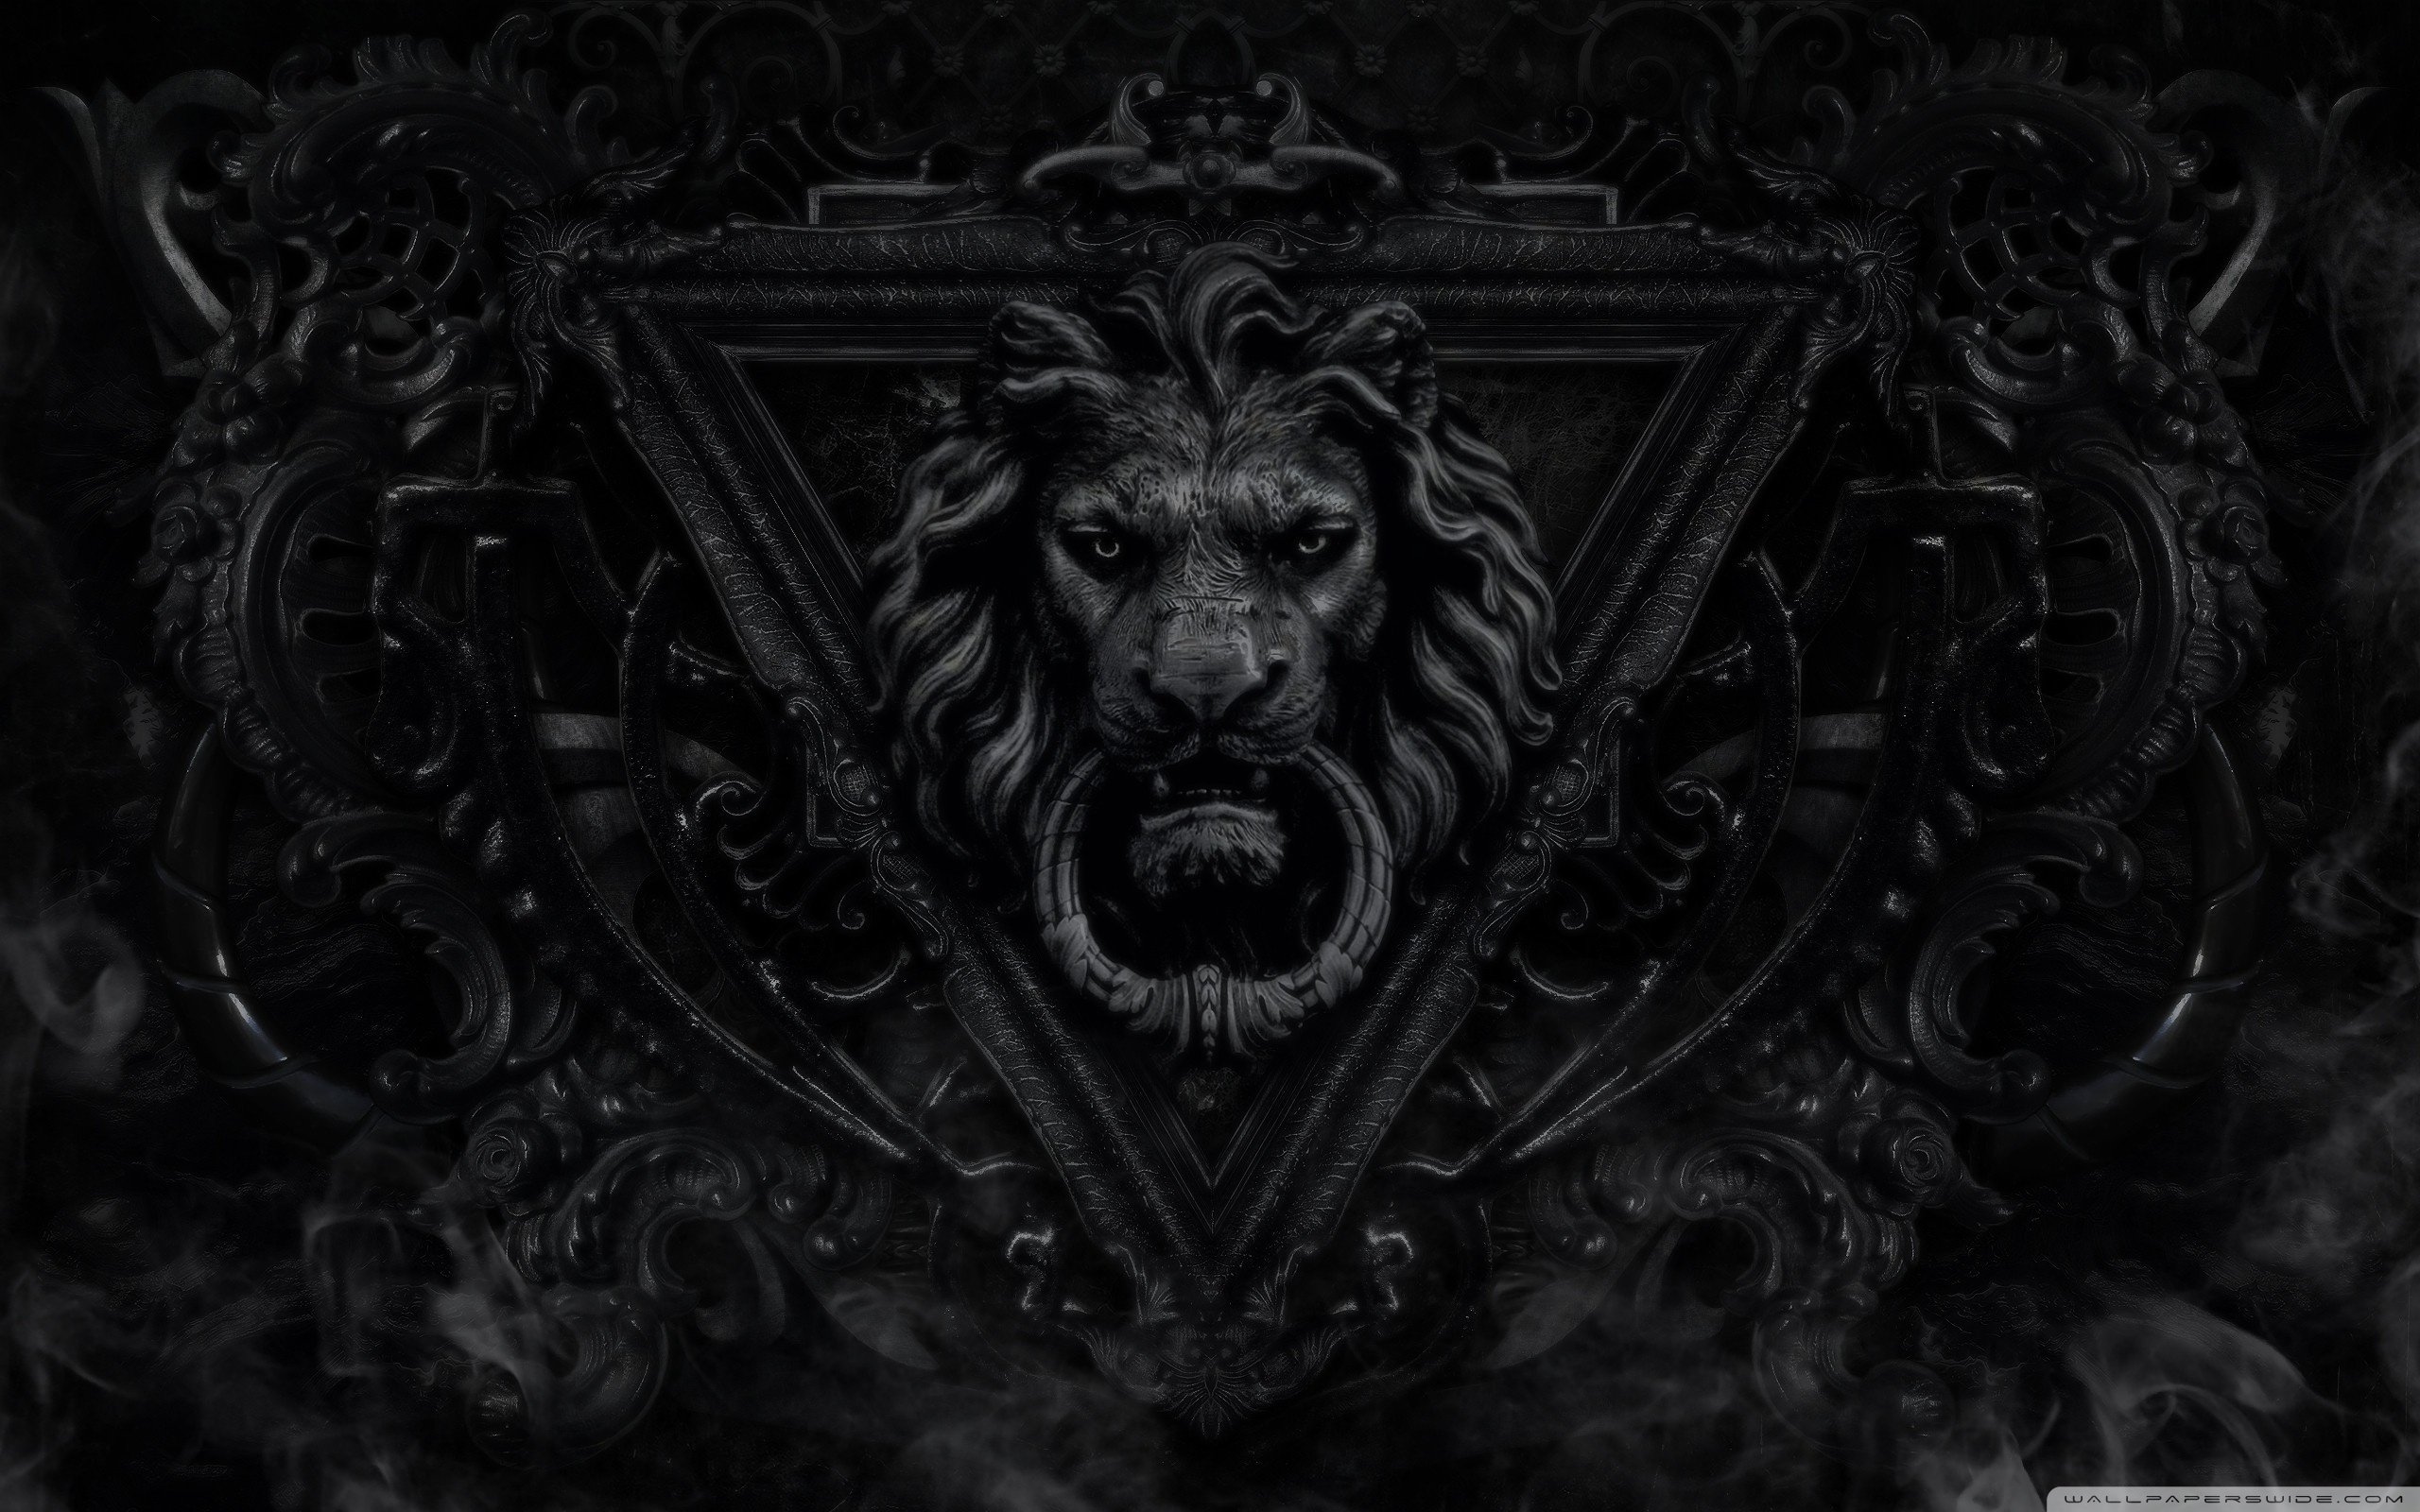 Dark Gothic Lion Wallpaper 2560x1600 Wallpapers Hd Desktop And Mobile Backgrounds